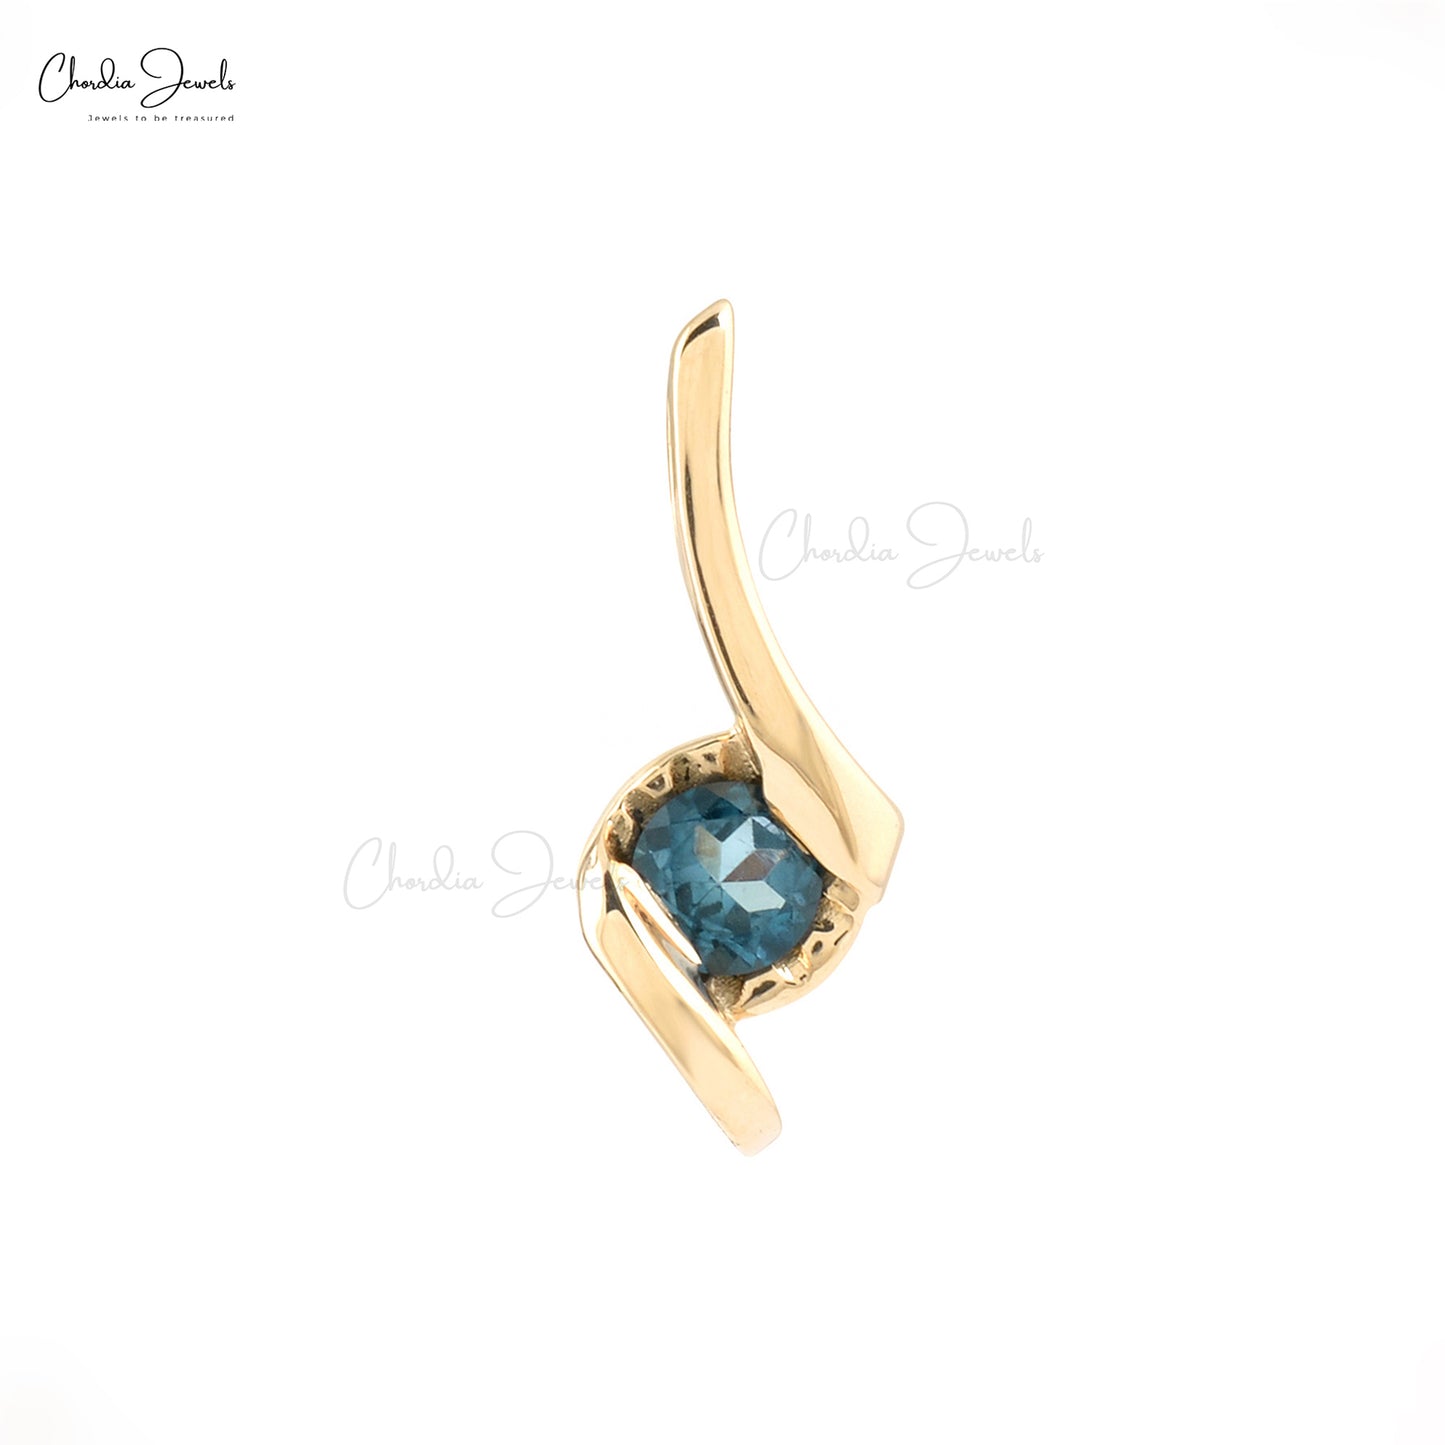 Load image into Gallery viewer, London Blue Topaz Pendants
